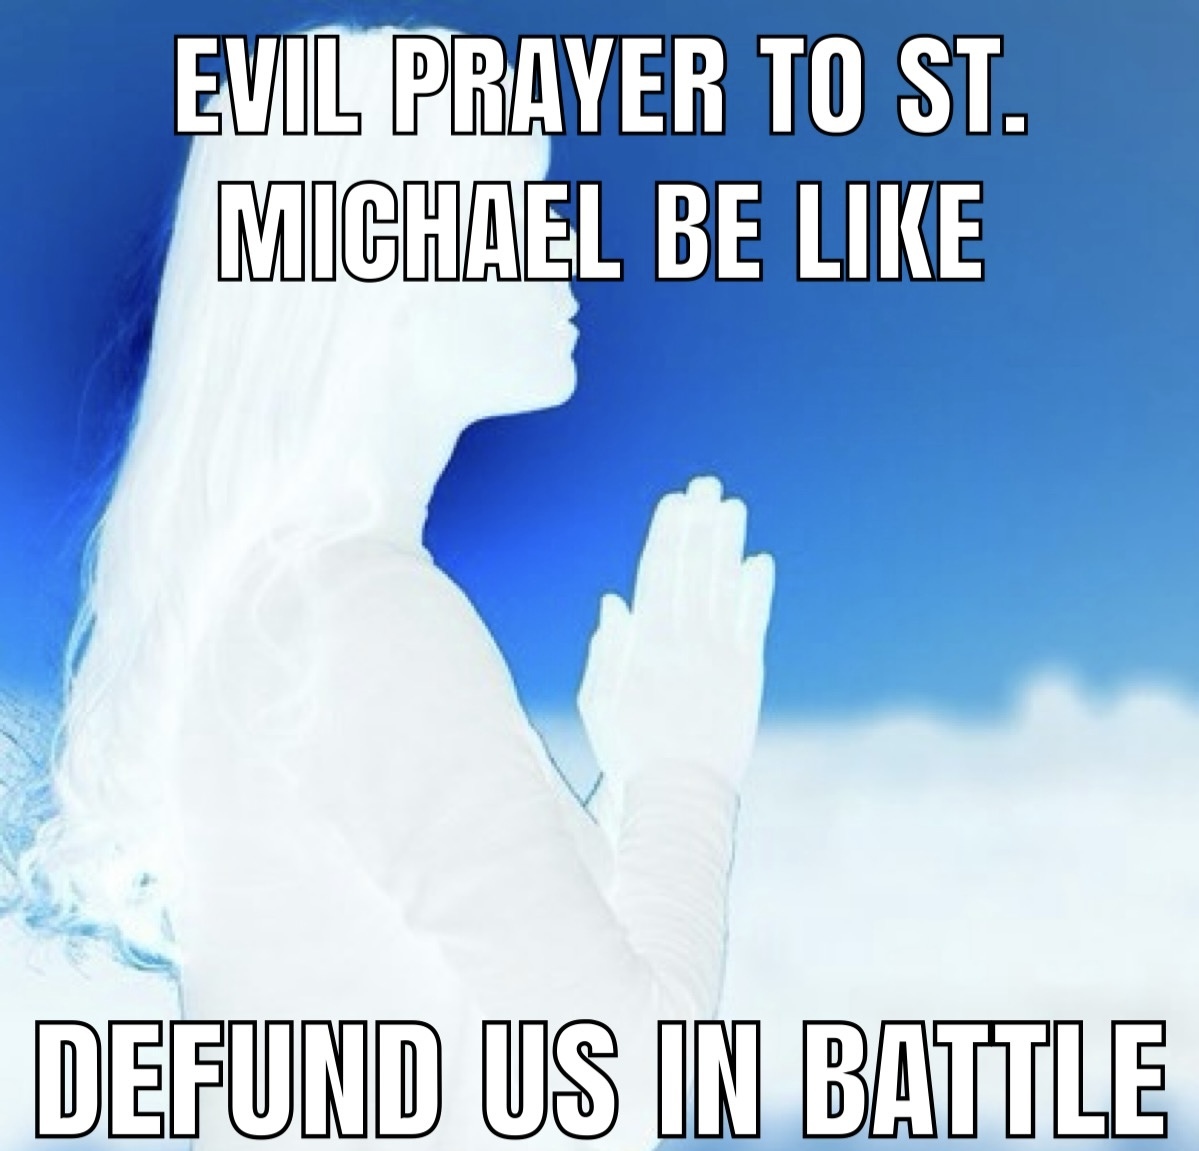 Inverted picture of outdoor silhouette of someone praying. Top: "Evil prayer to St. Michael be like". Bottom: "Defund us in battle".